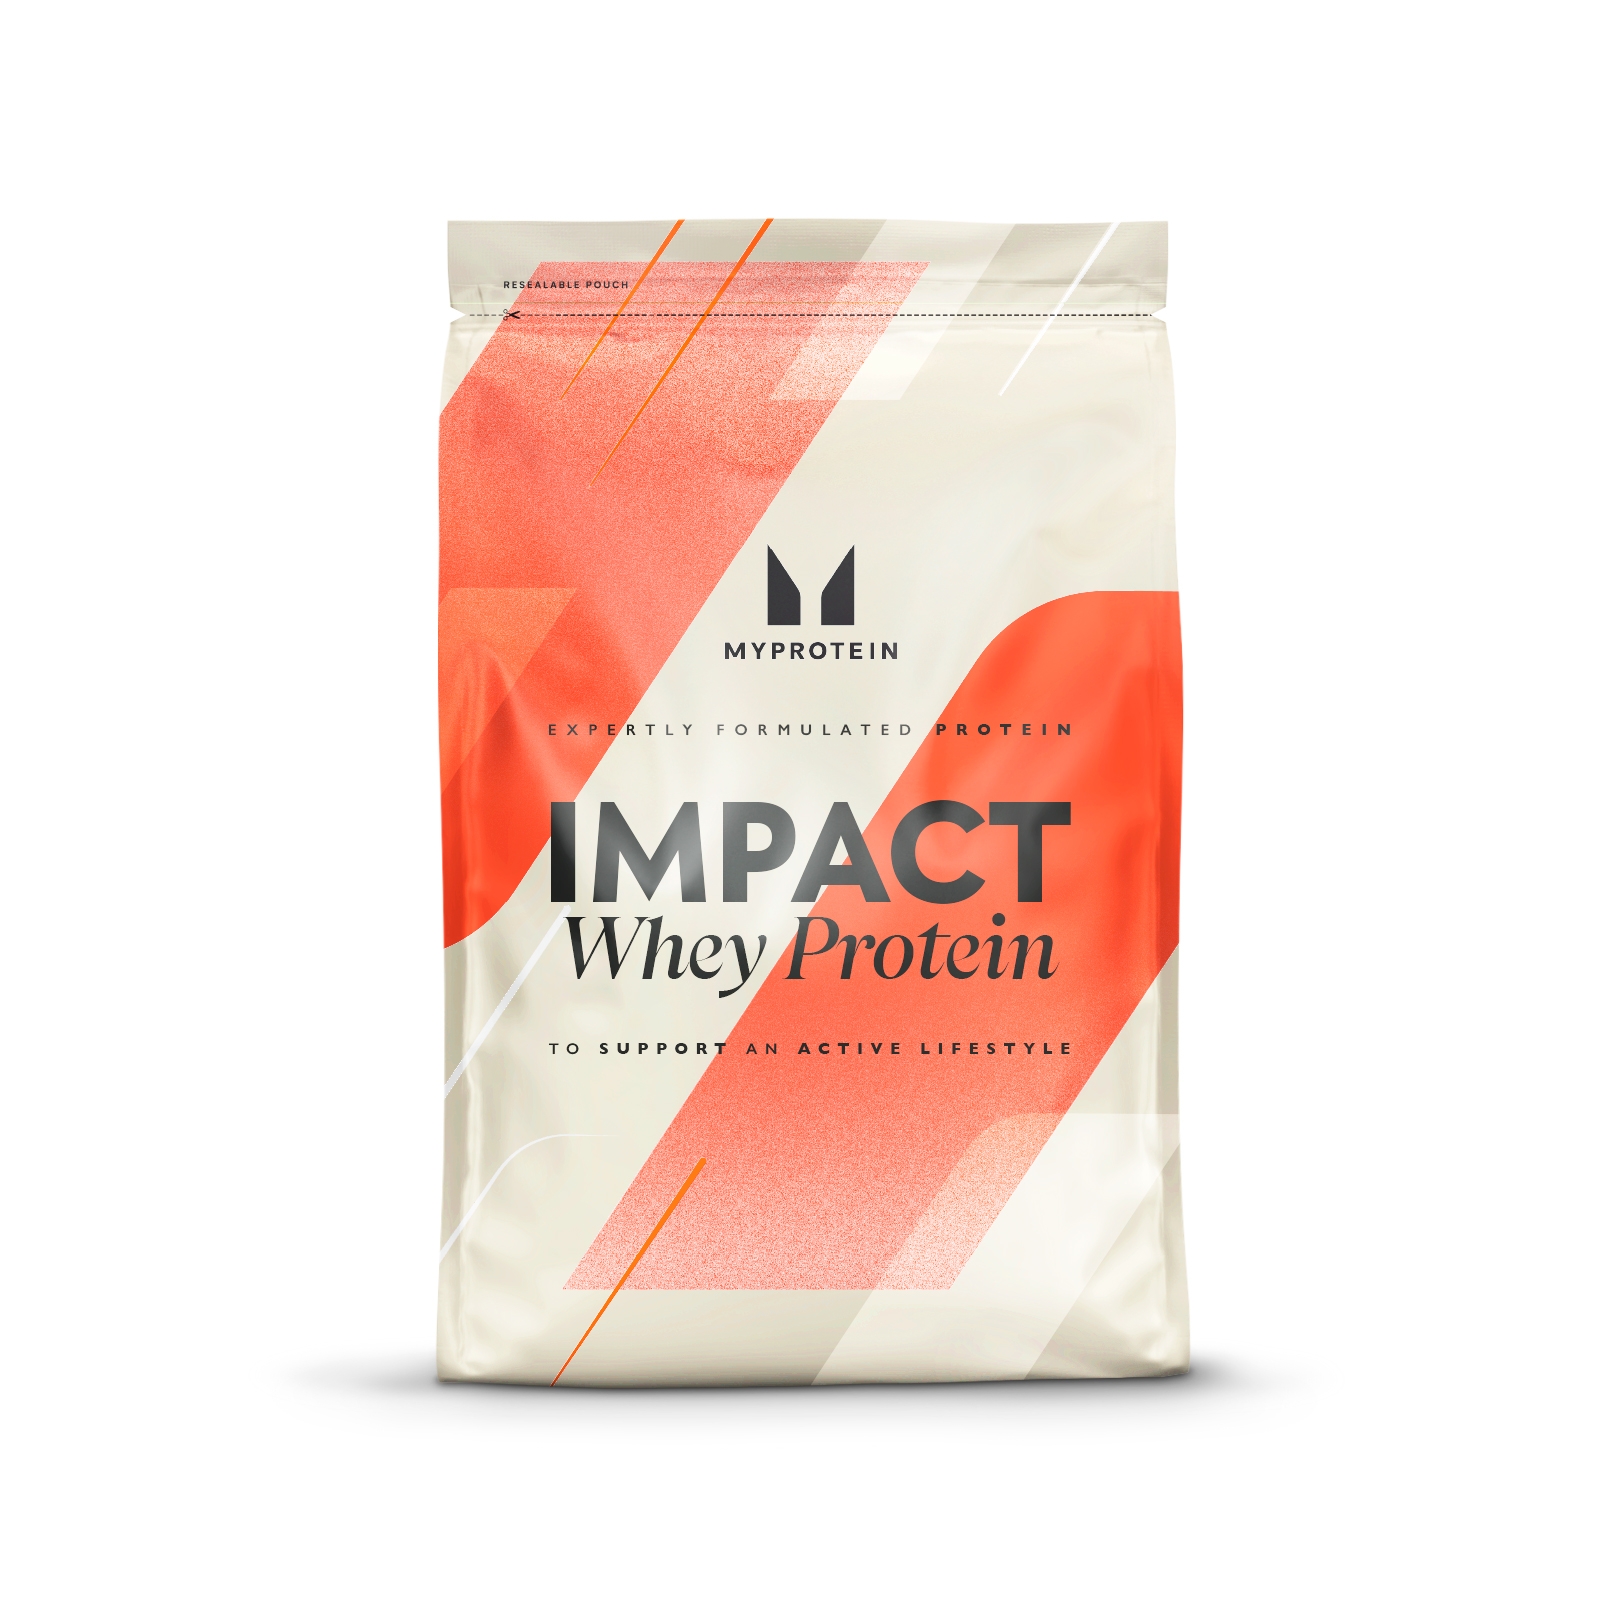 Image of Myprotein Impact Whey Protein - 25kg - Chocolate Branco 12309347 PT21